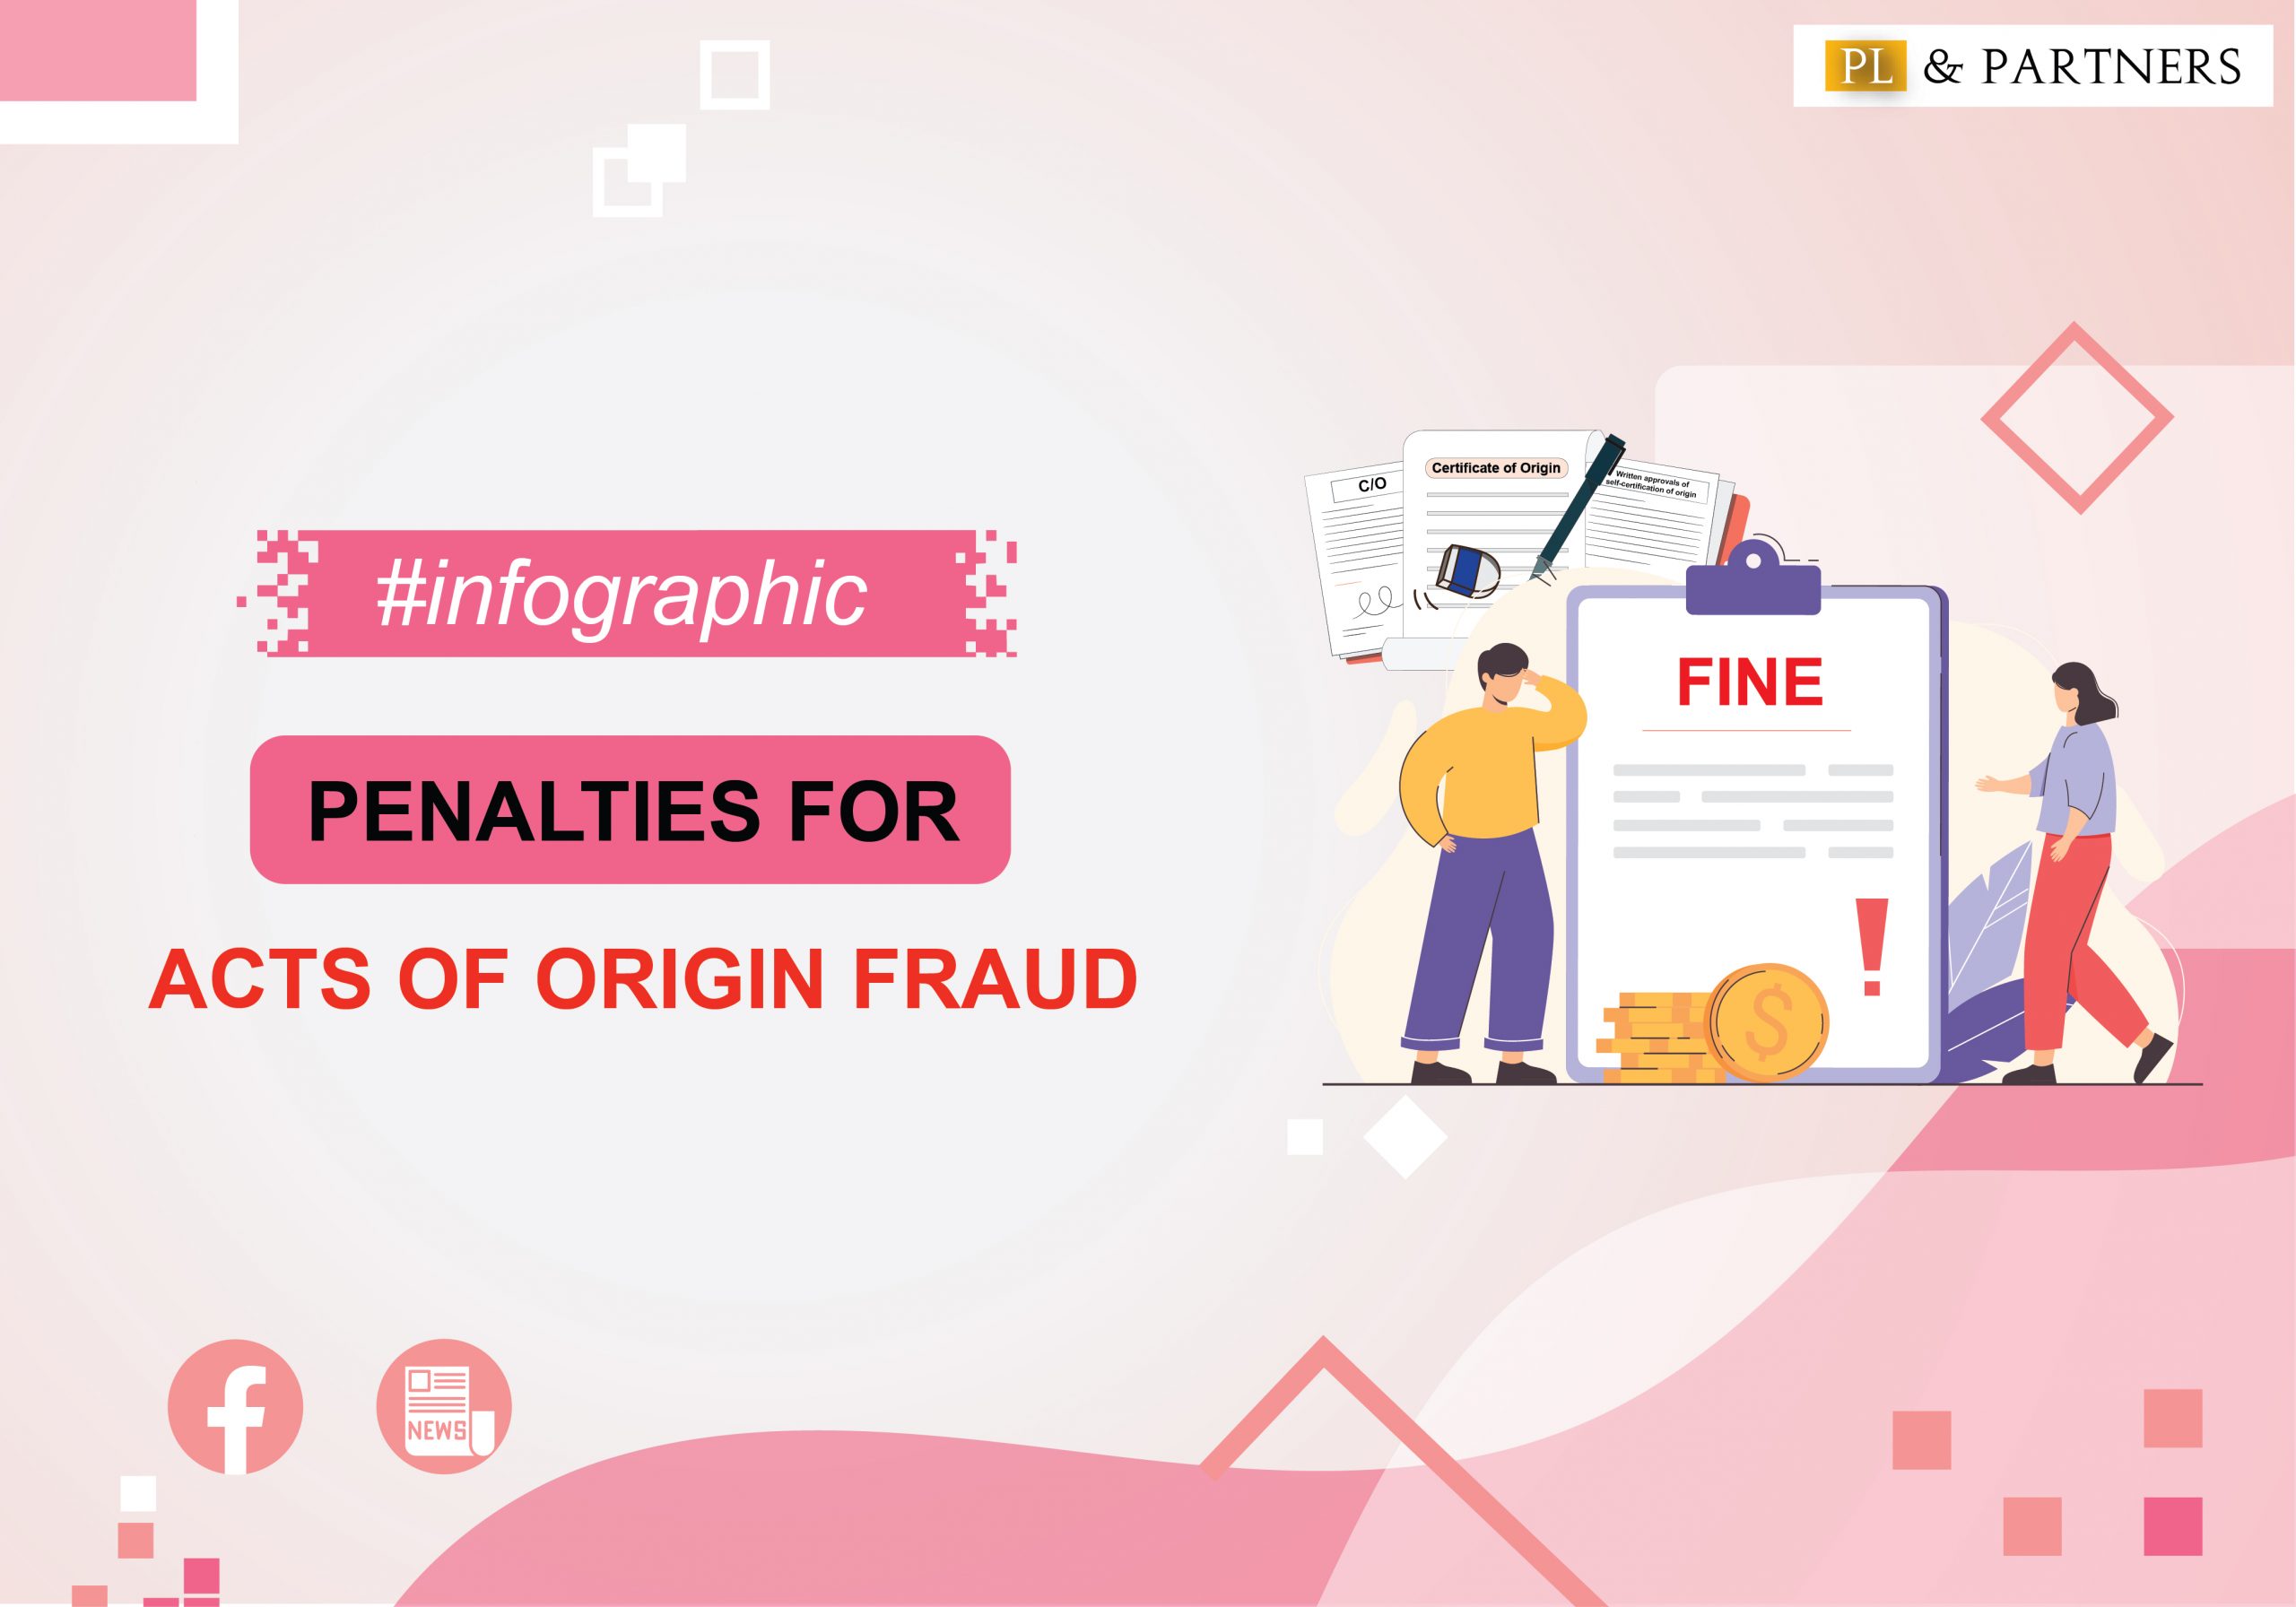 PENALTIES FOR ACTS OF ORIGIN FRAUD